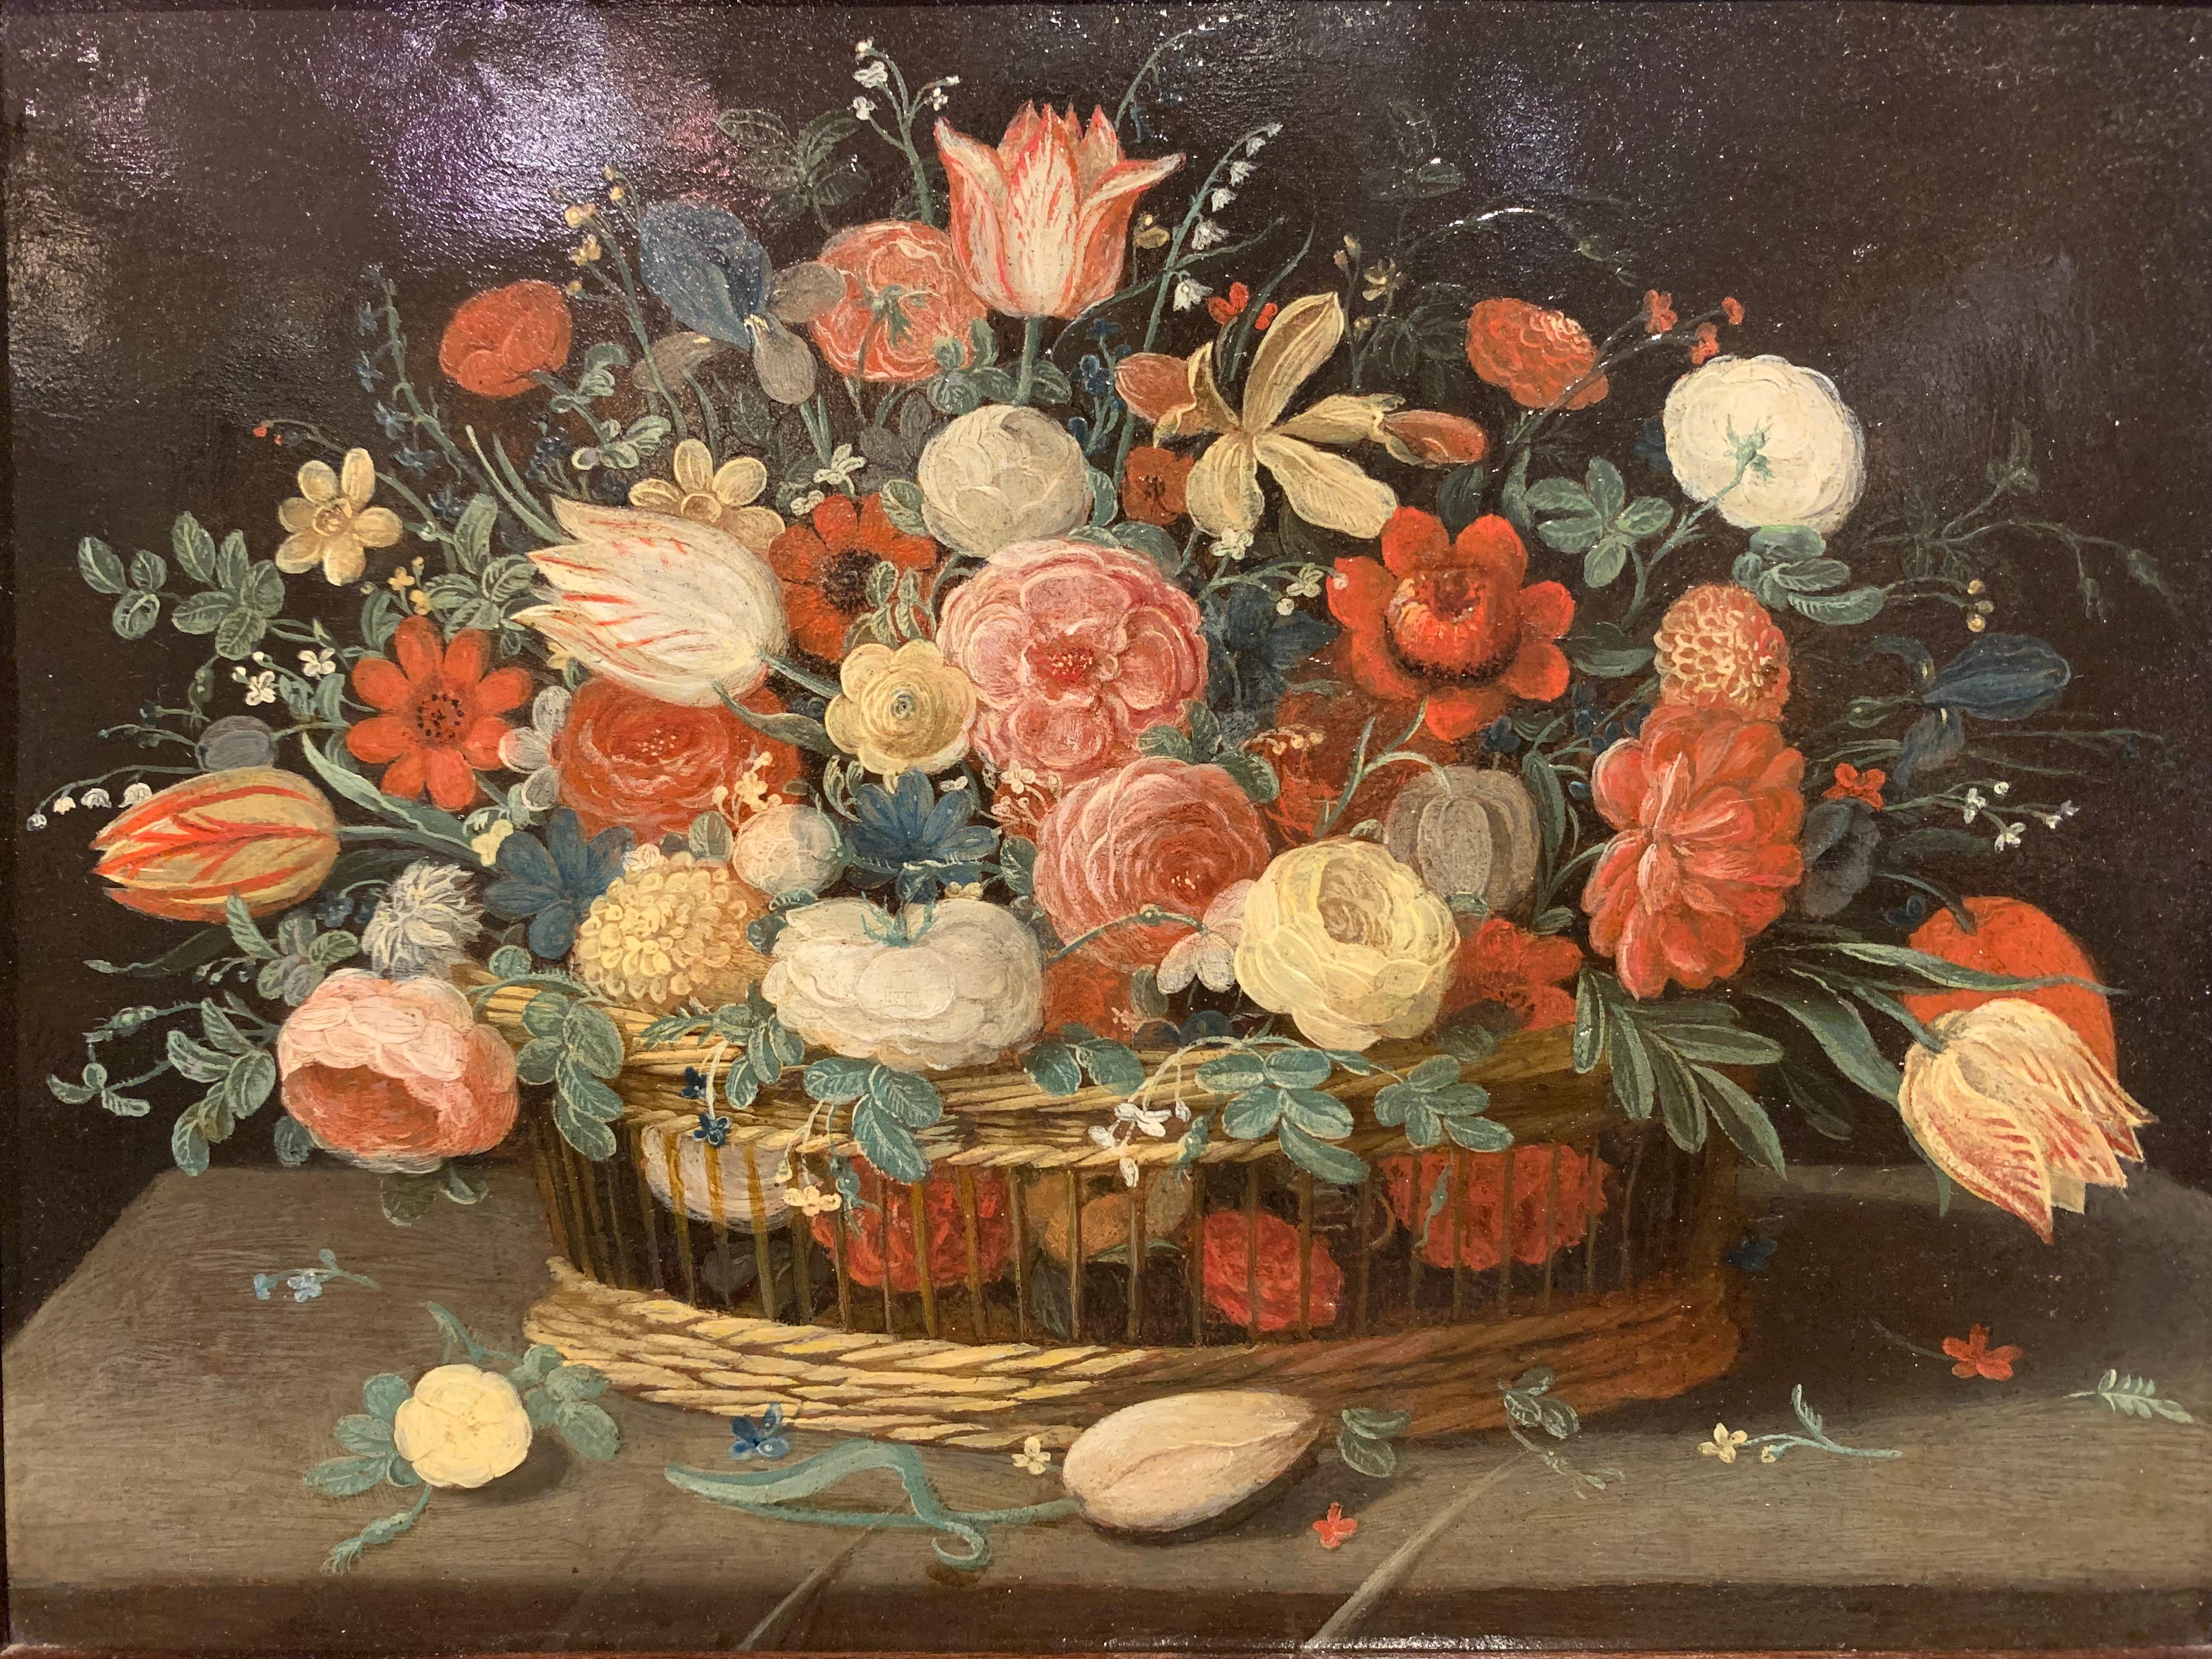 Oil on copper depicting a basket of flowers made up of roses, tulips and irises, with small florets fleshing out the larger buds carefully arranged in the basket.
Jan Van KESSEL the younger was the great-grandson of Jan BRUEGHEL de VELOURS. He